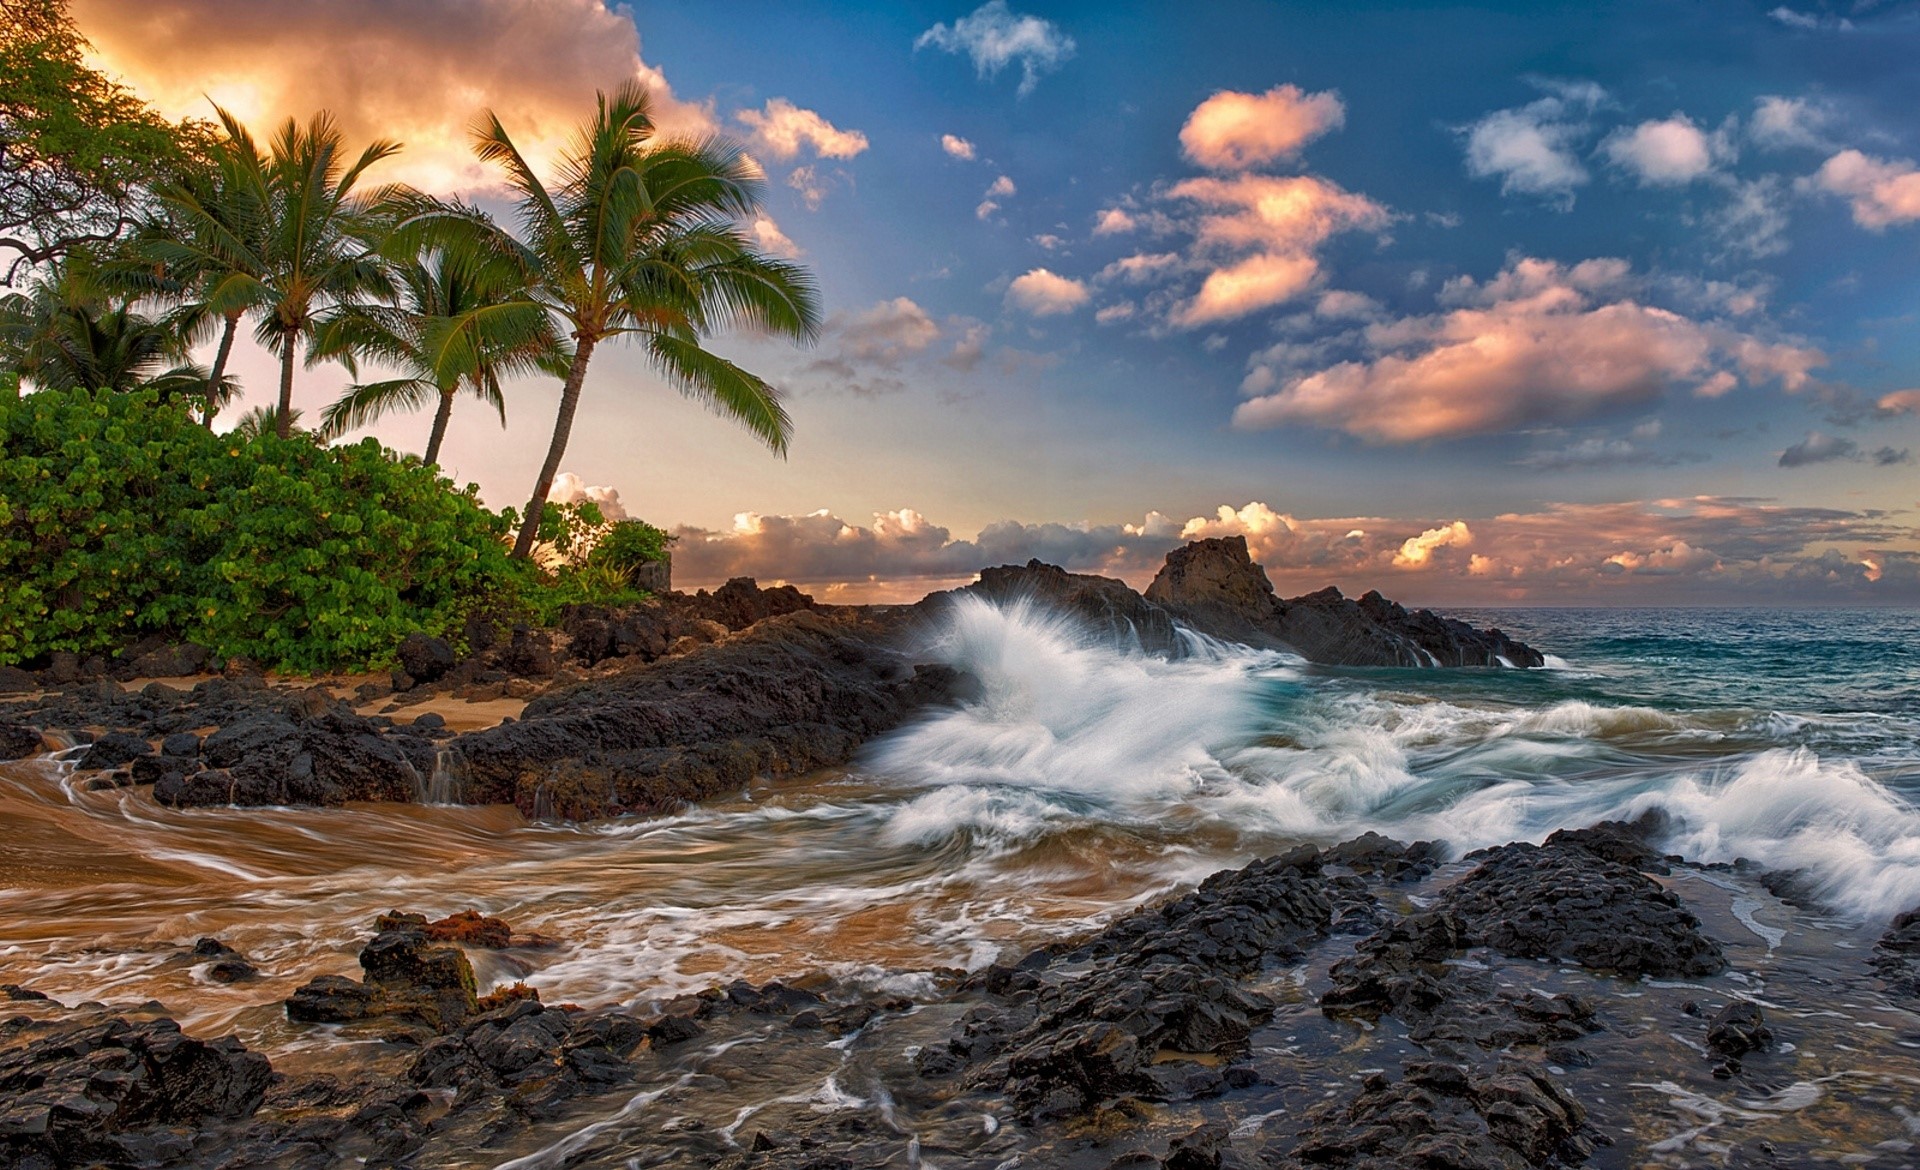 Direct flights from Vancouver to Kahului (Hawaii) in March-April for only 326CAD round-trip including GST🔥